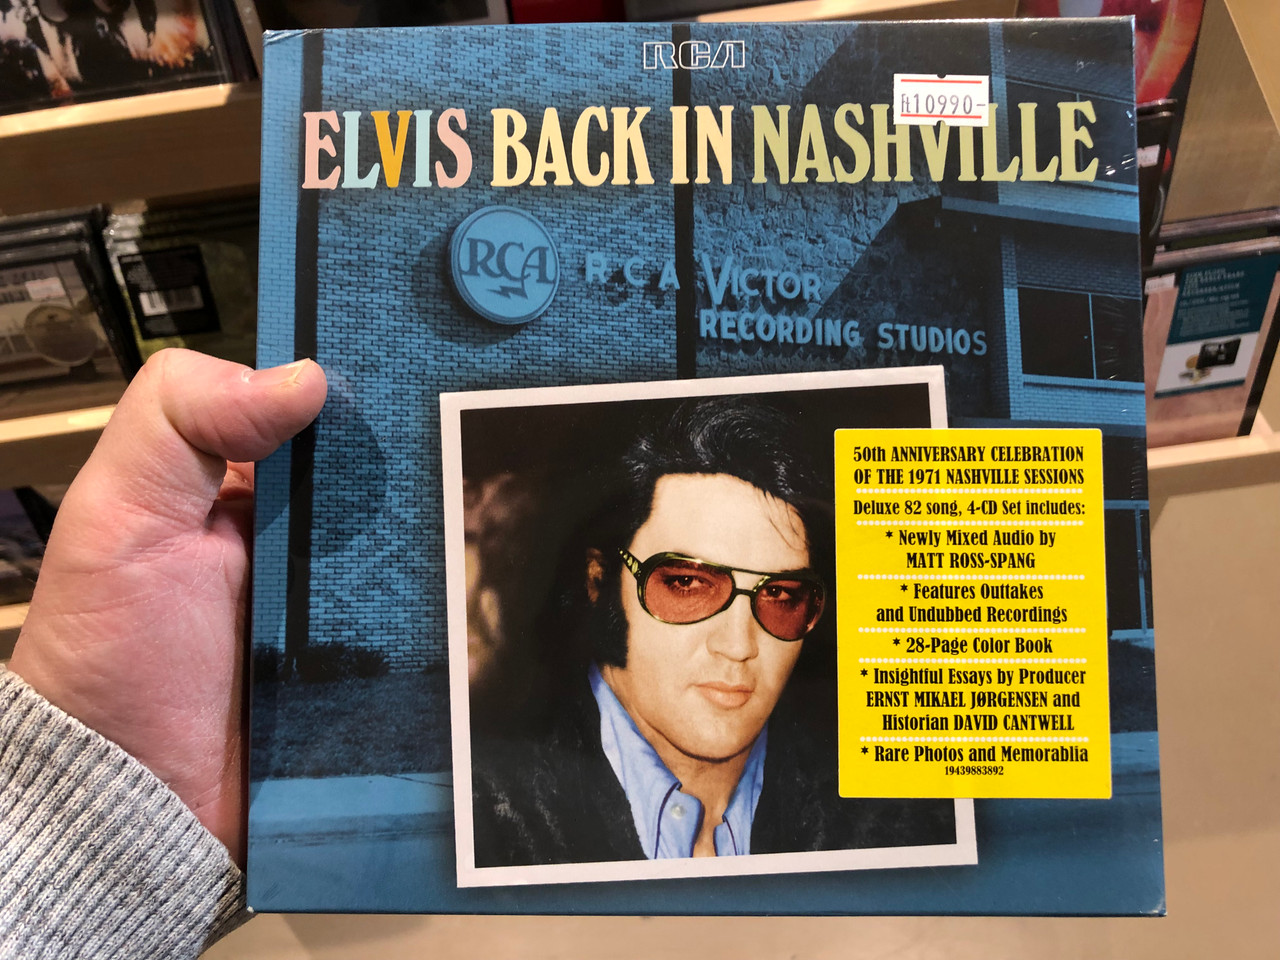 https://cdn10.bigcommerce.com/s-62bdpkt7pb/products/0/images/219930/Elvis_Back_In_Nashville_50th_anniversary_celebration_of_the_1971_nashville_sessions_Deluxe_82_song_4-CD_includes_Newly_Mixed_Audio_By_Matt_Ross-Spang_Features_Outtakes_and_Undubbed_Reco_1__62876.1648704112.1280.1280.JPG?c=2&_gl=1*1pvnetl*_ga*MjA2NTIxMjE2MC4xNTkwNTEyNTMy*_ga_WS2VZYPC6G*MTY0ODcwMjQ5OS4zMzguMS4xNjQ4NzAzNzYzLjM4